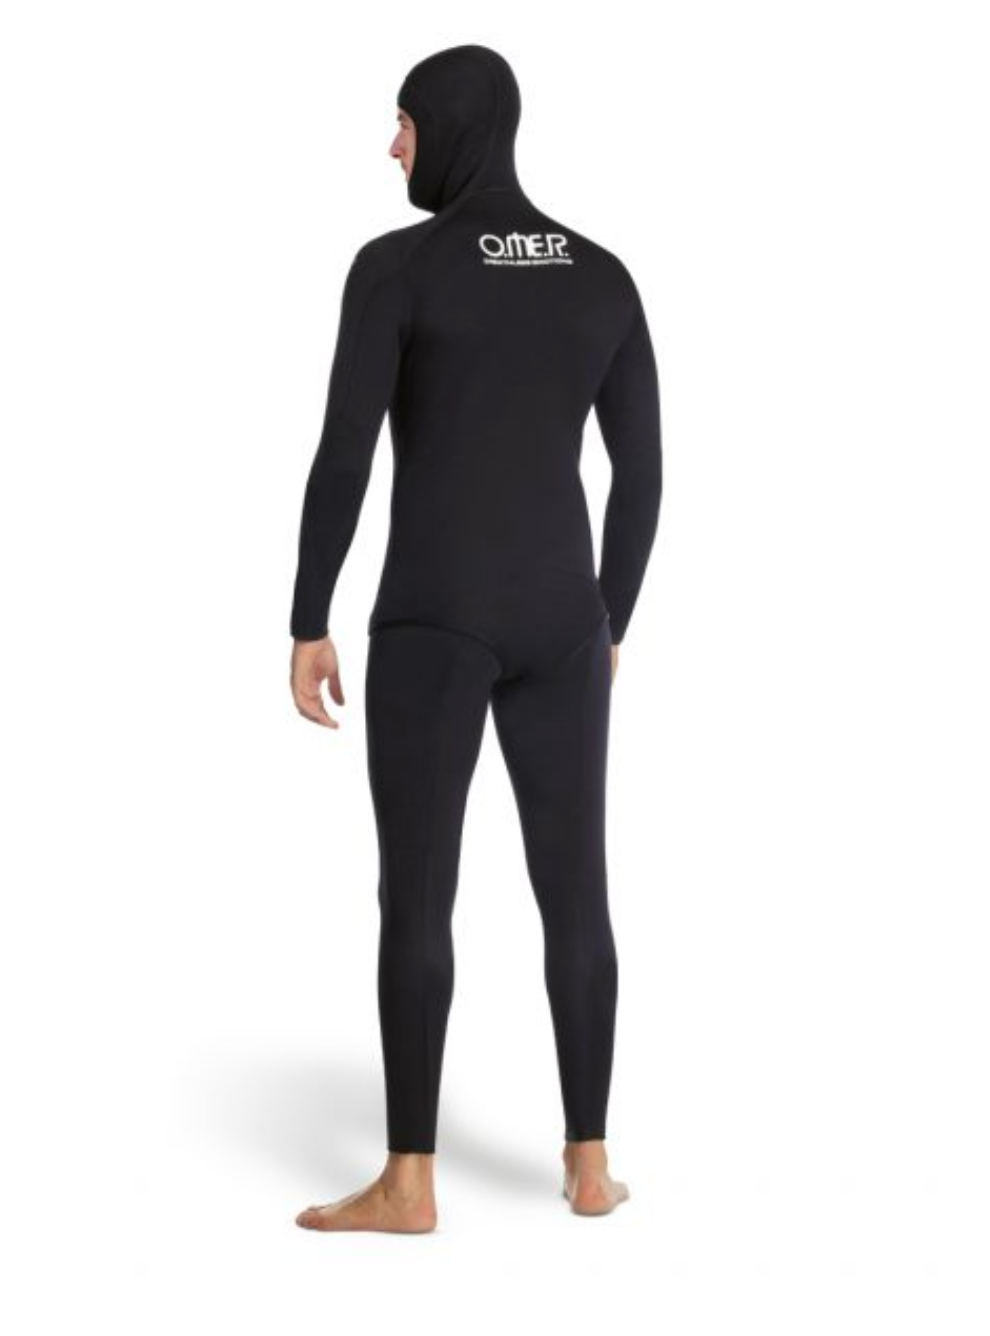 Omer Master Team Wetsuit - Blue Tuna Spearfishing Co